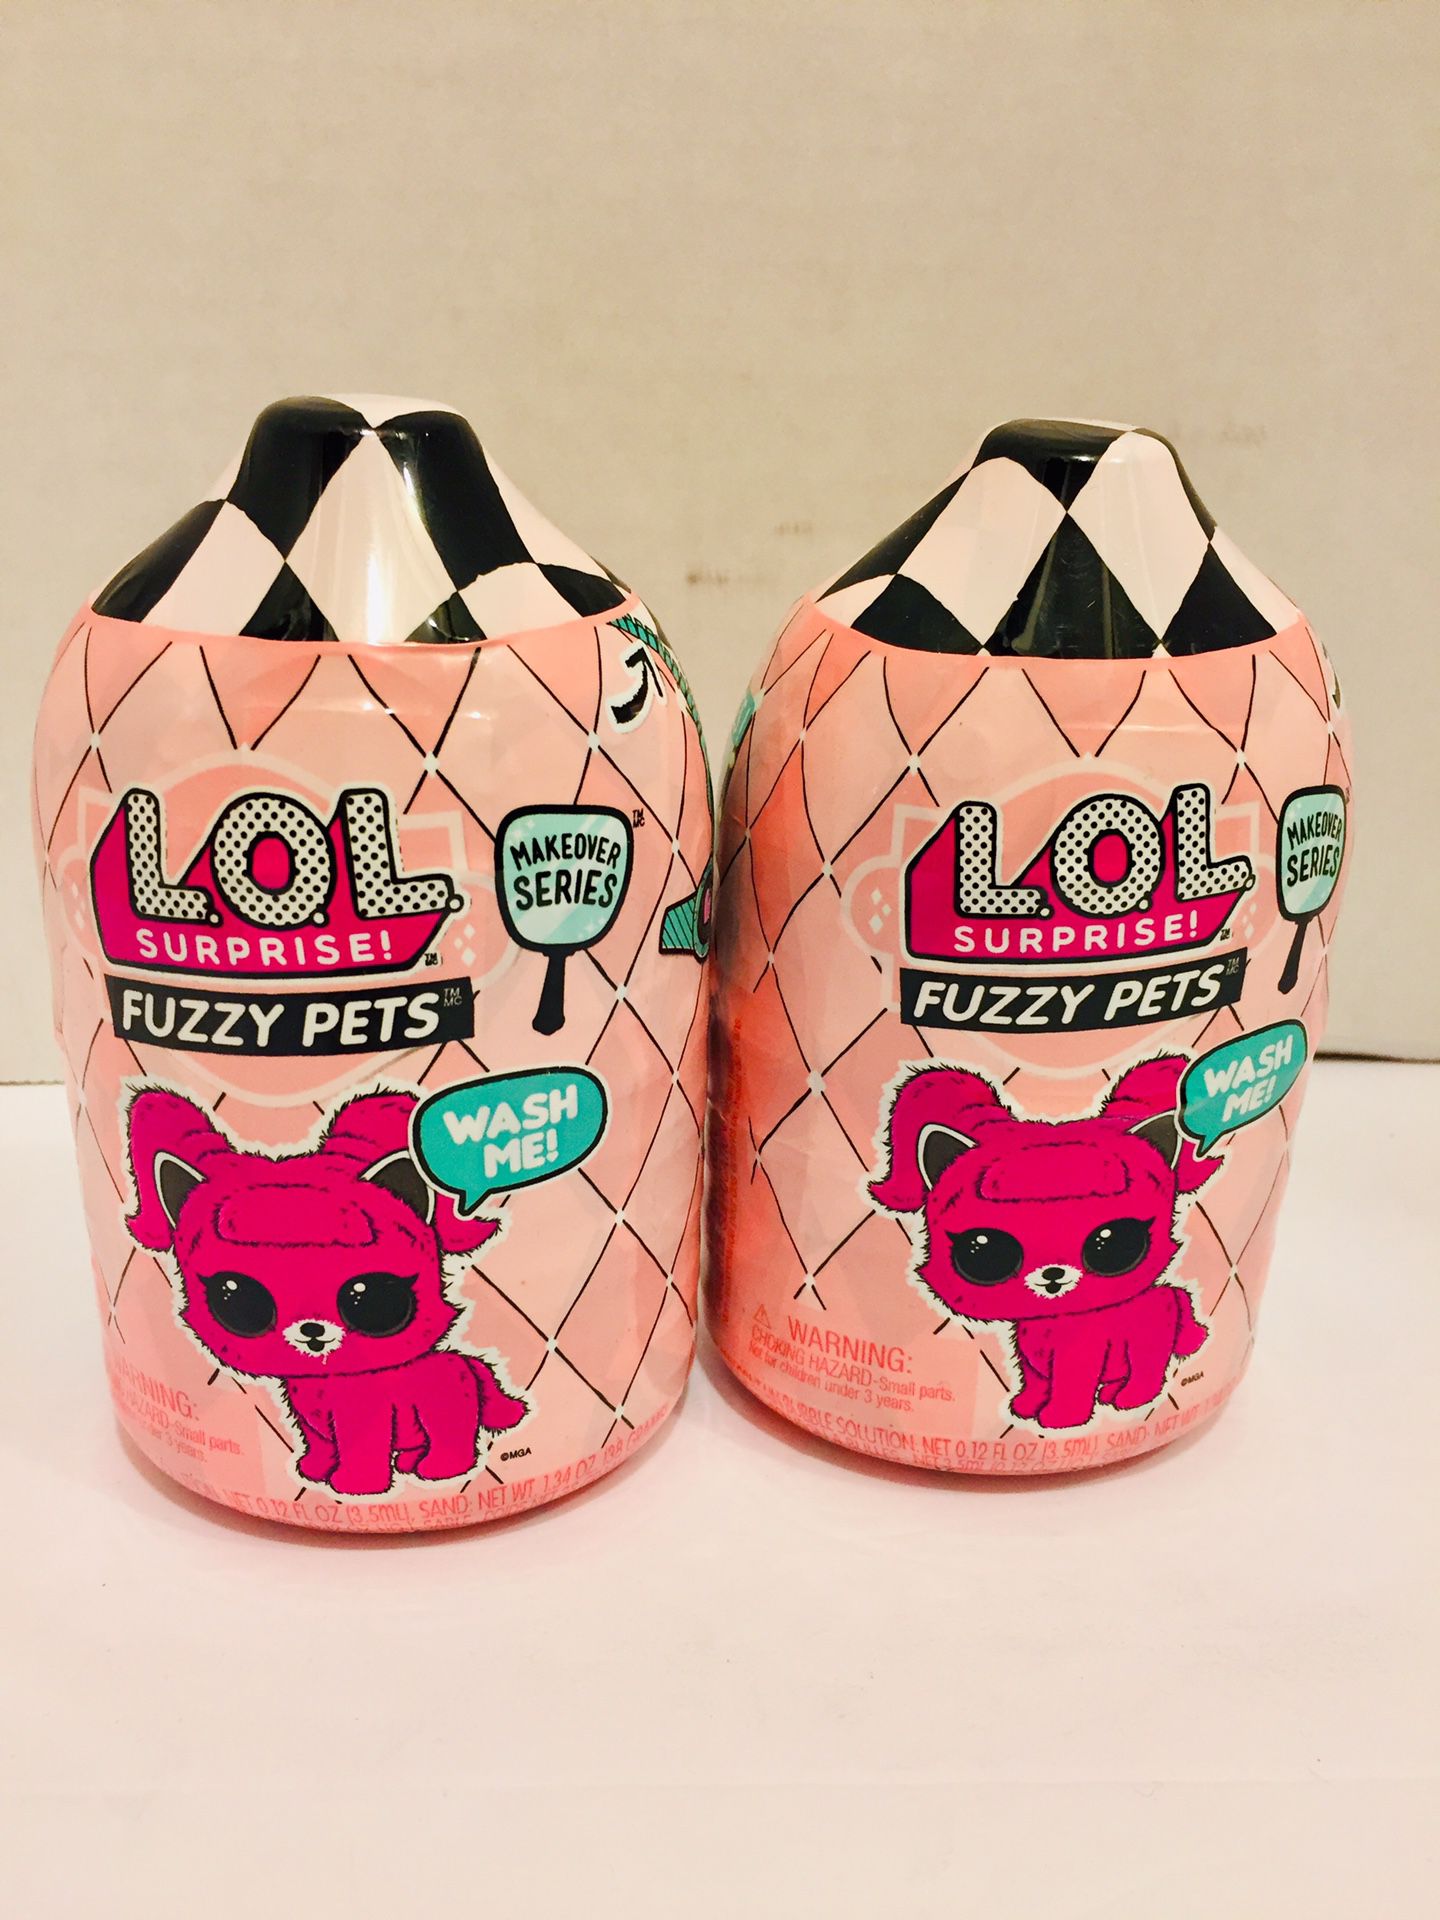 New! LOL Surprises Fuzzy Pets 2 for $14